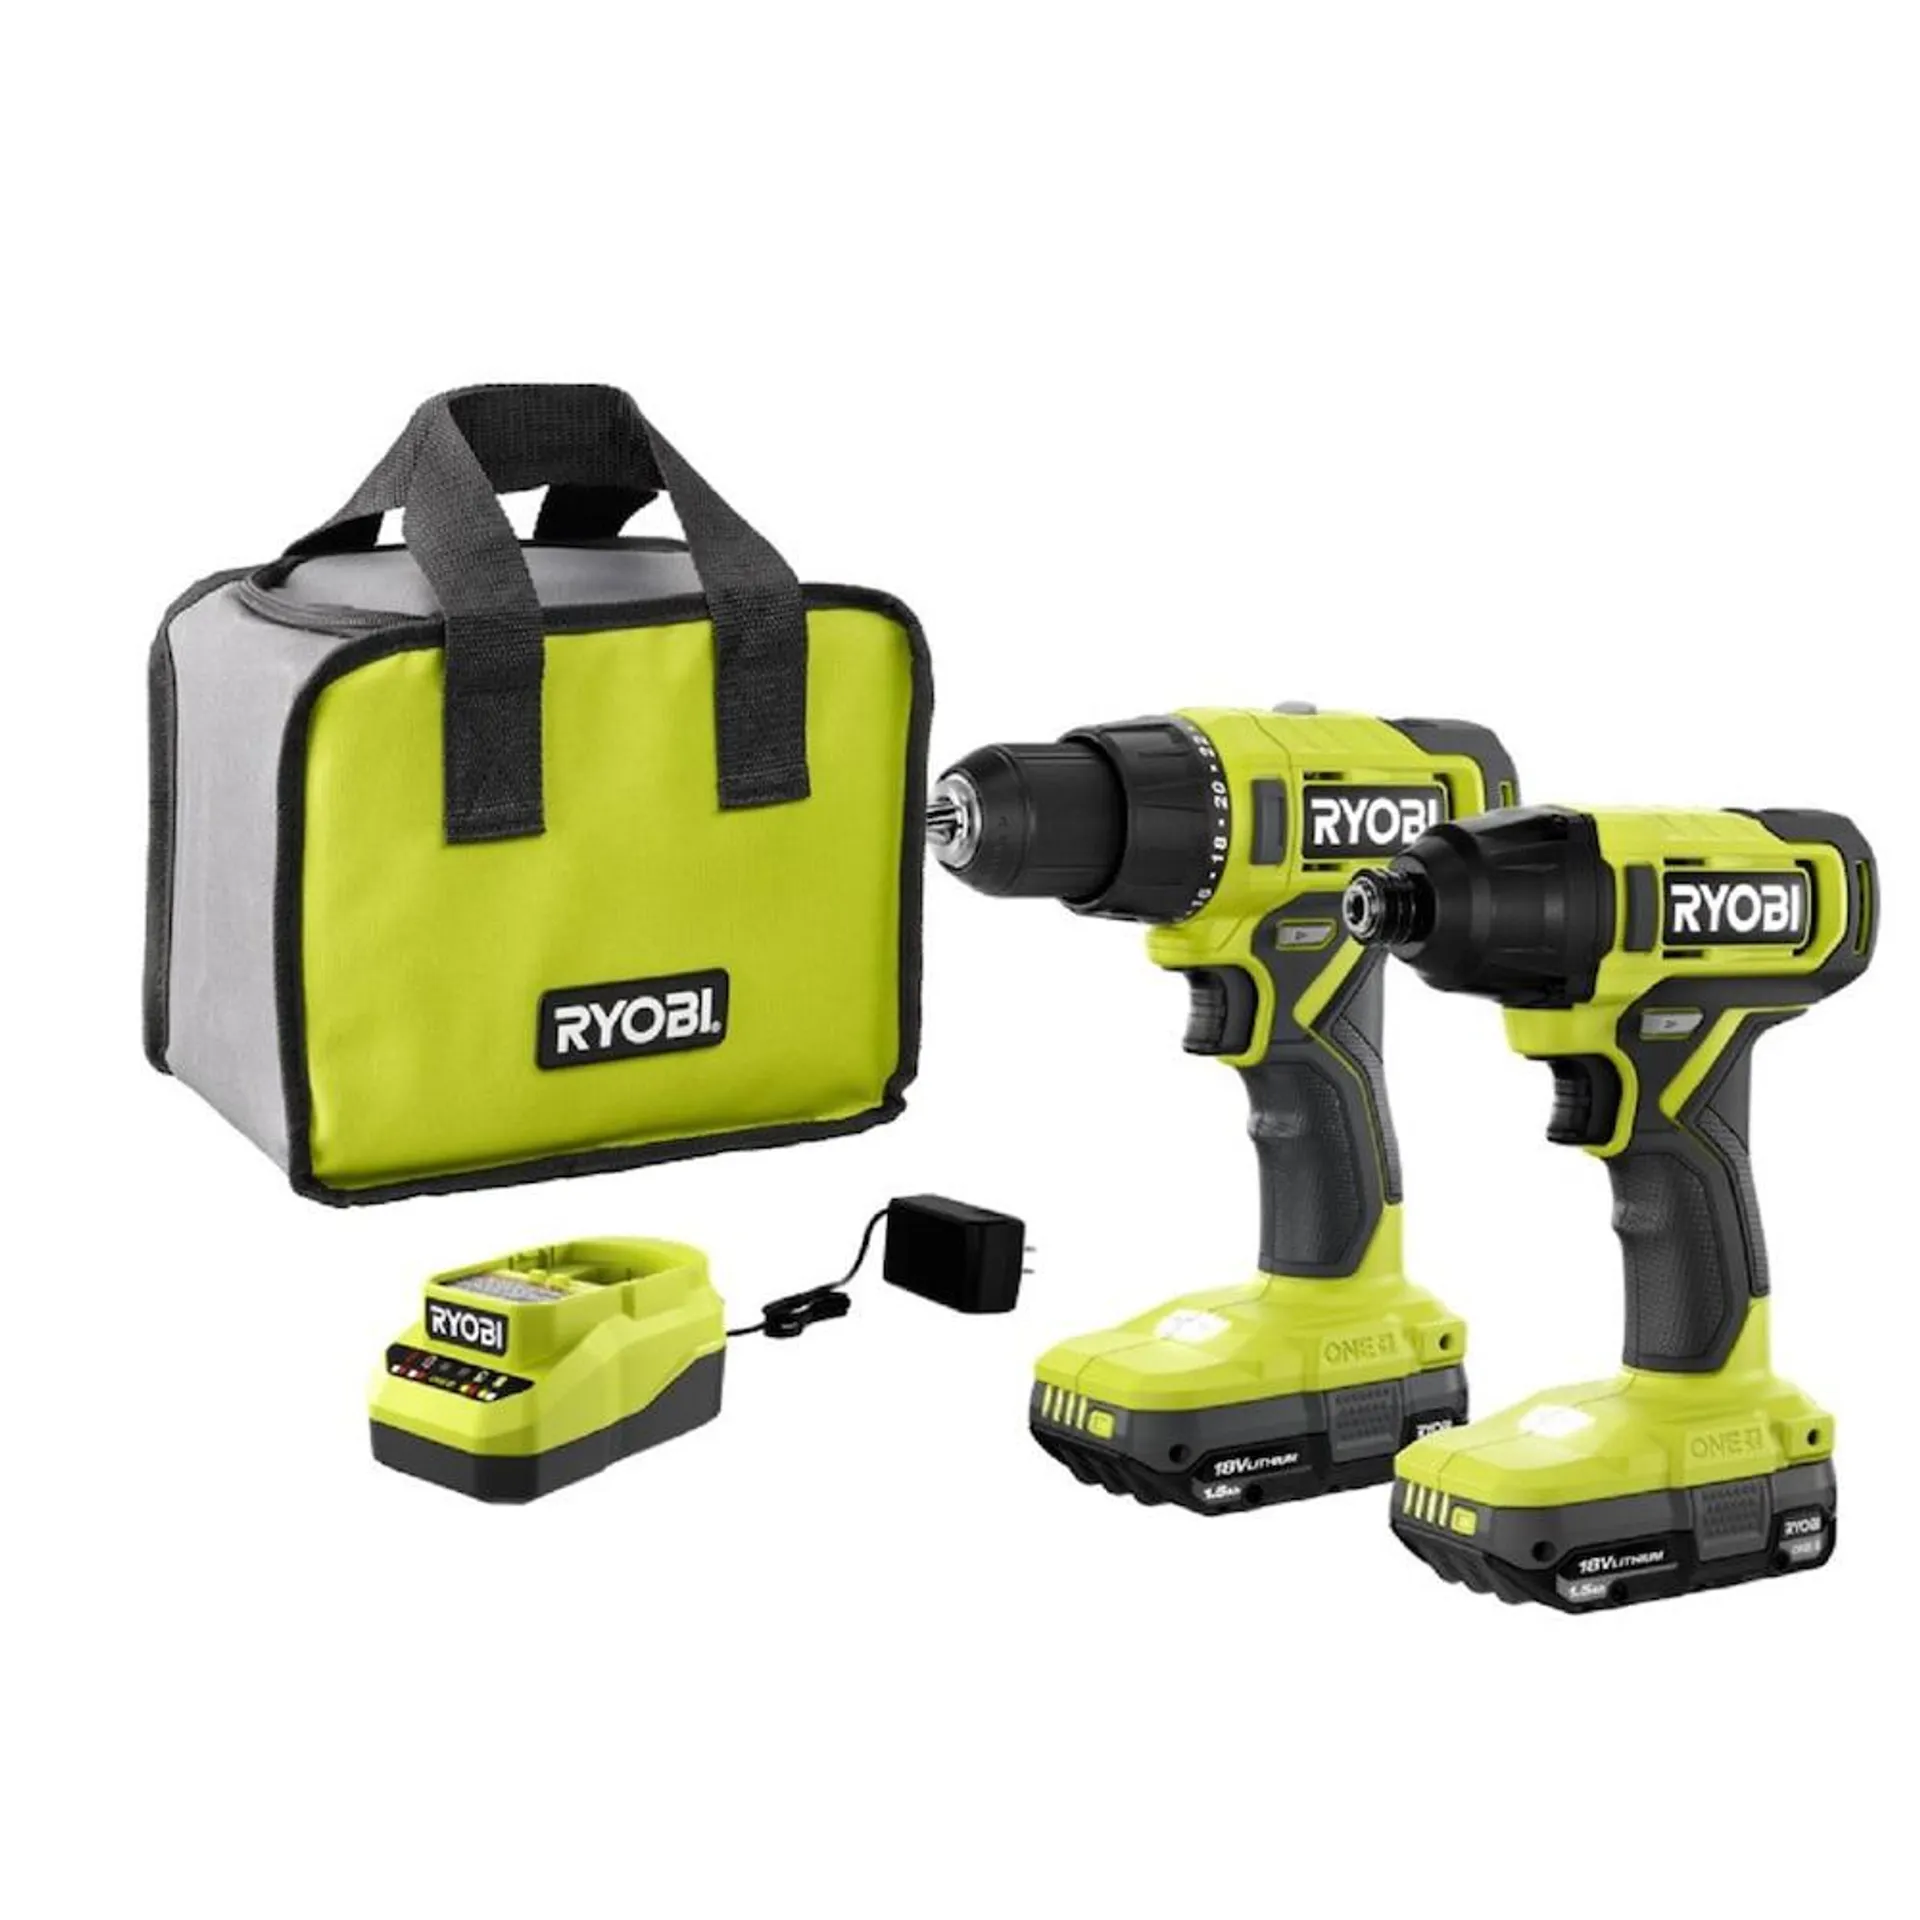 18V ONE+ 1/2-inch Drill/Driver & 1/4-inch Impact Driver Kit with (2) Batteries and Charger